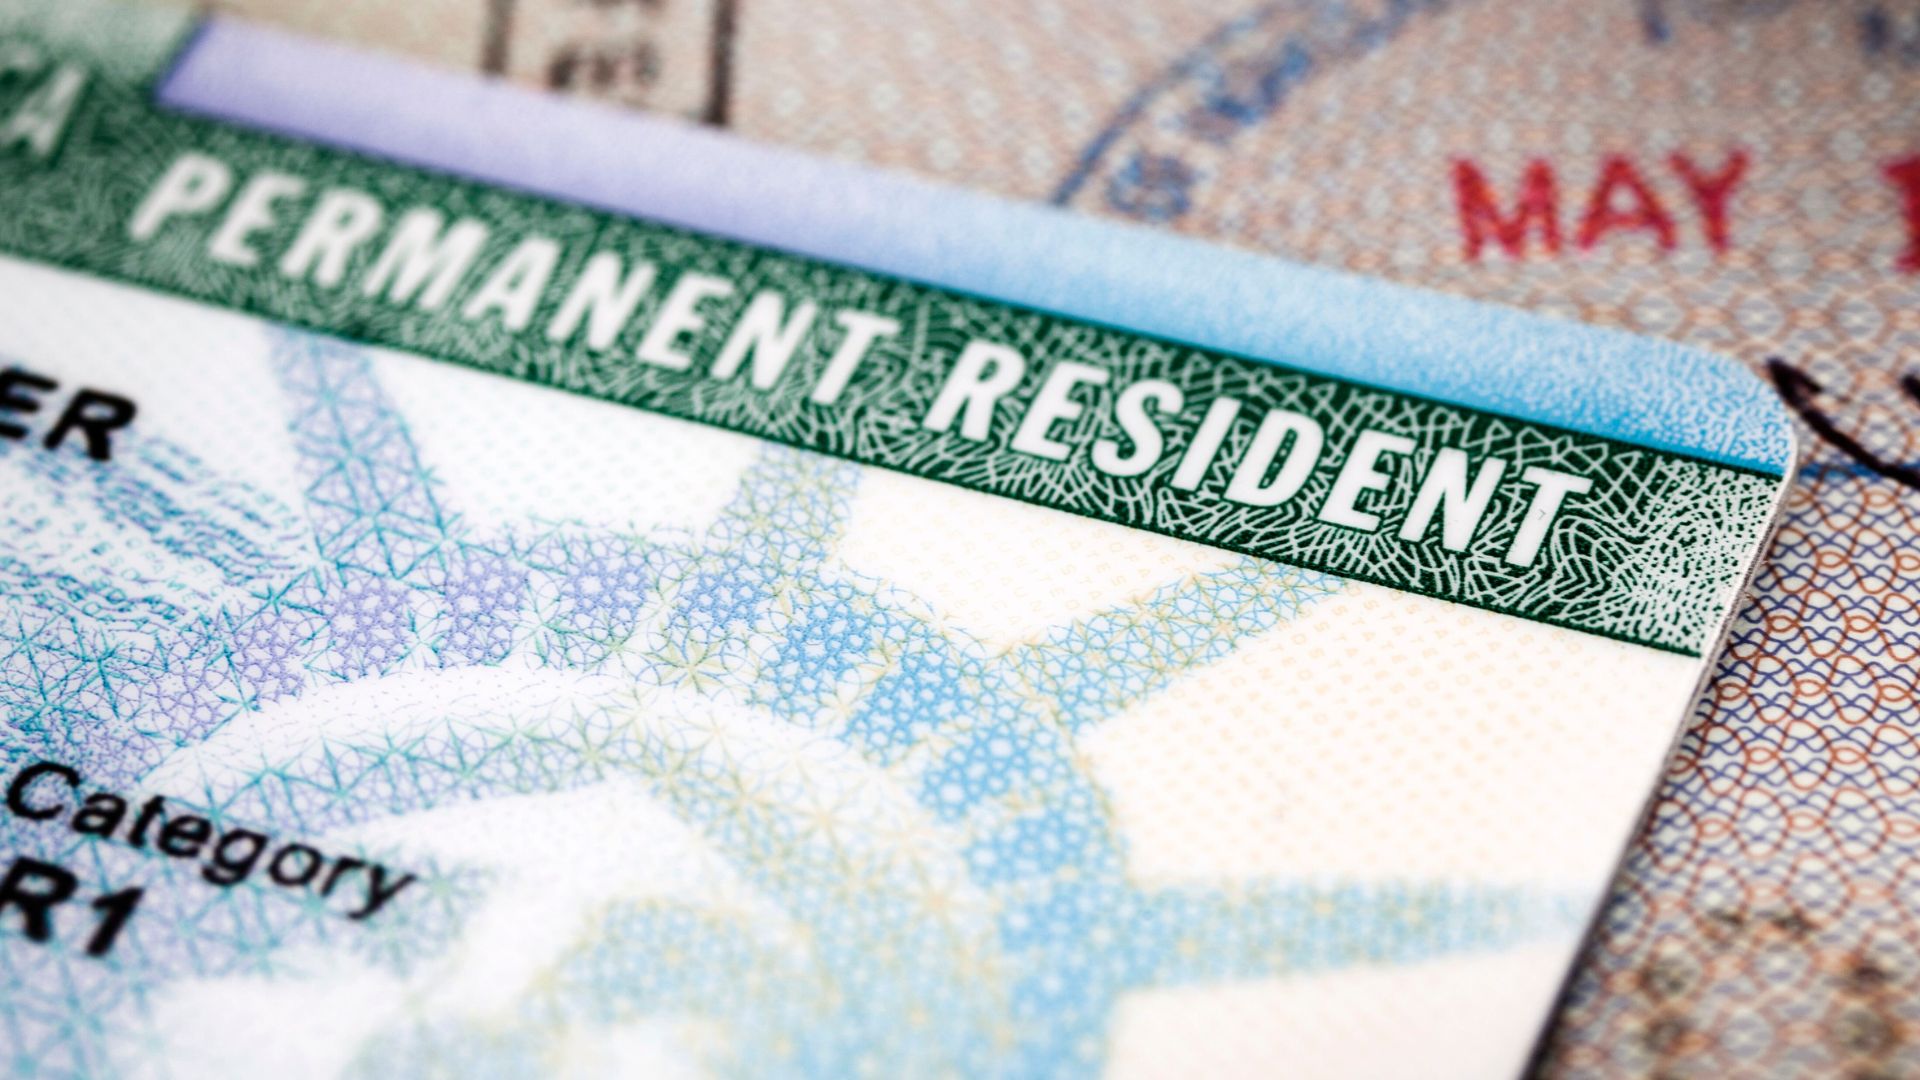 With an EB-1 visa, you get a green card or permanent residence.  (epoxided/Getty Images)